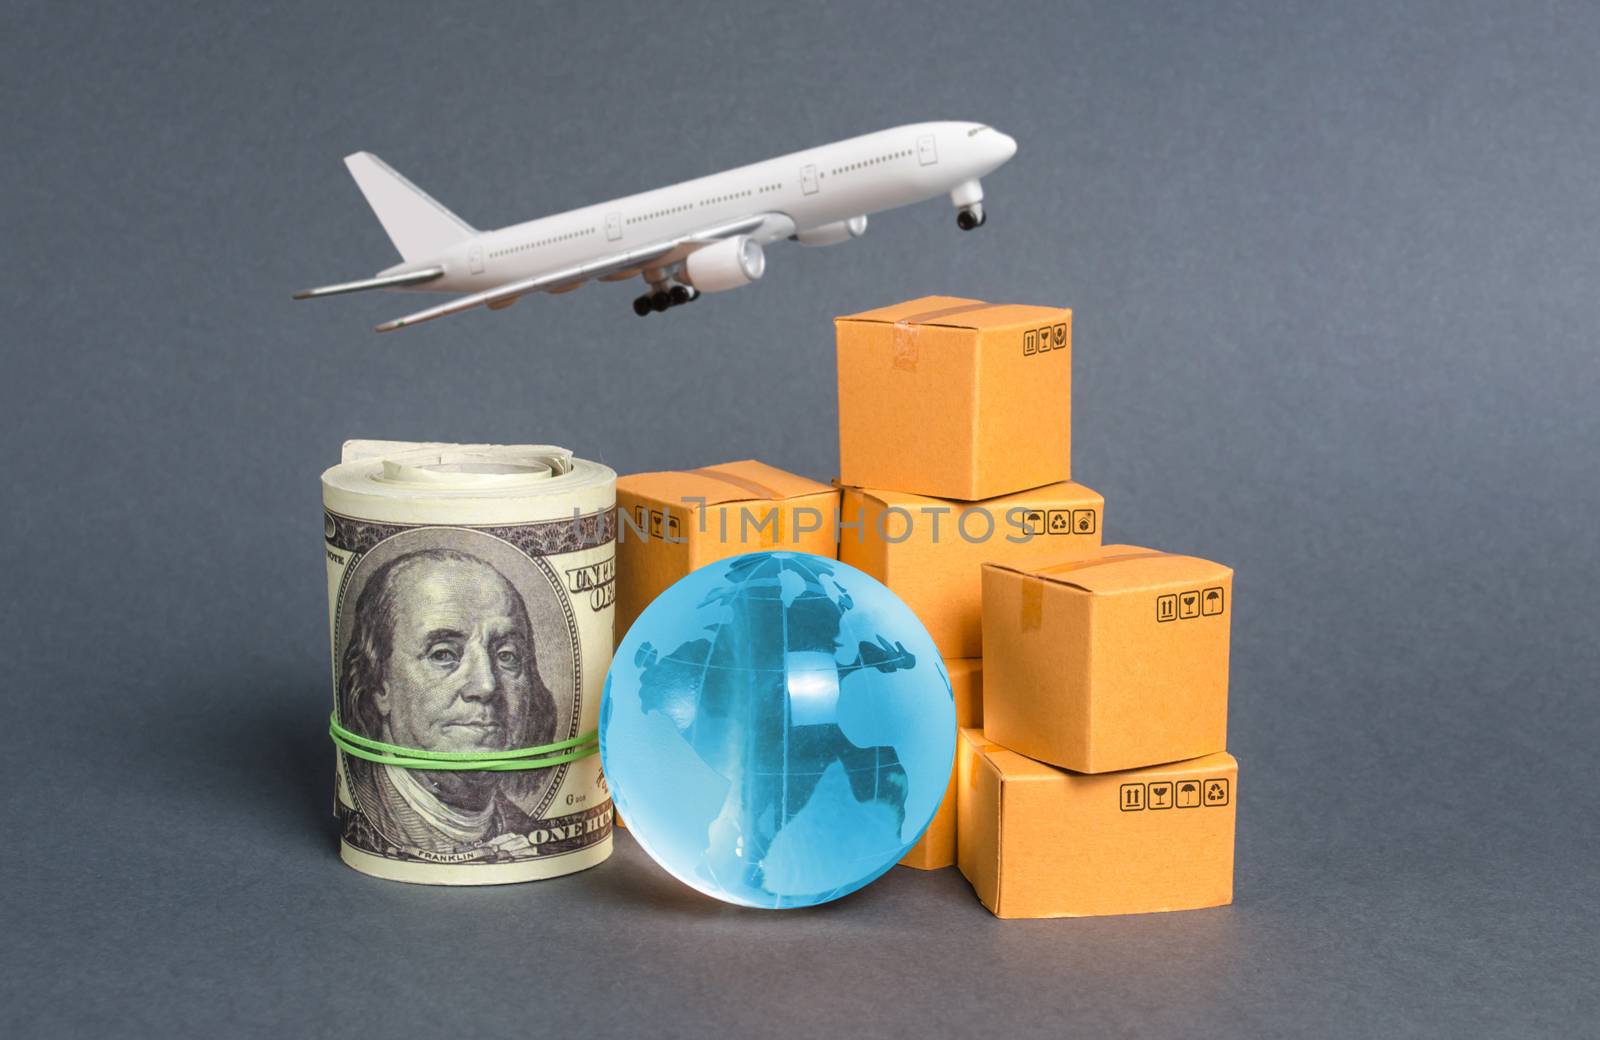 A stack of boxes, airplane a bundle of dollars and a blue planet earth globe. World trade and commodity exchange. commerce traffic trading balance. Import, export, transit of products. by iLixe48